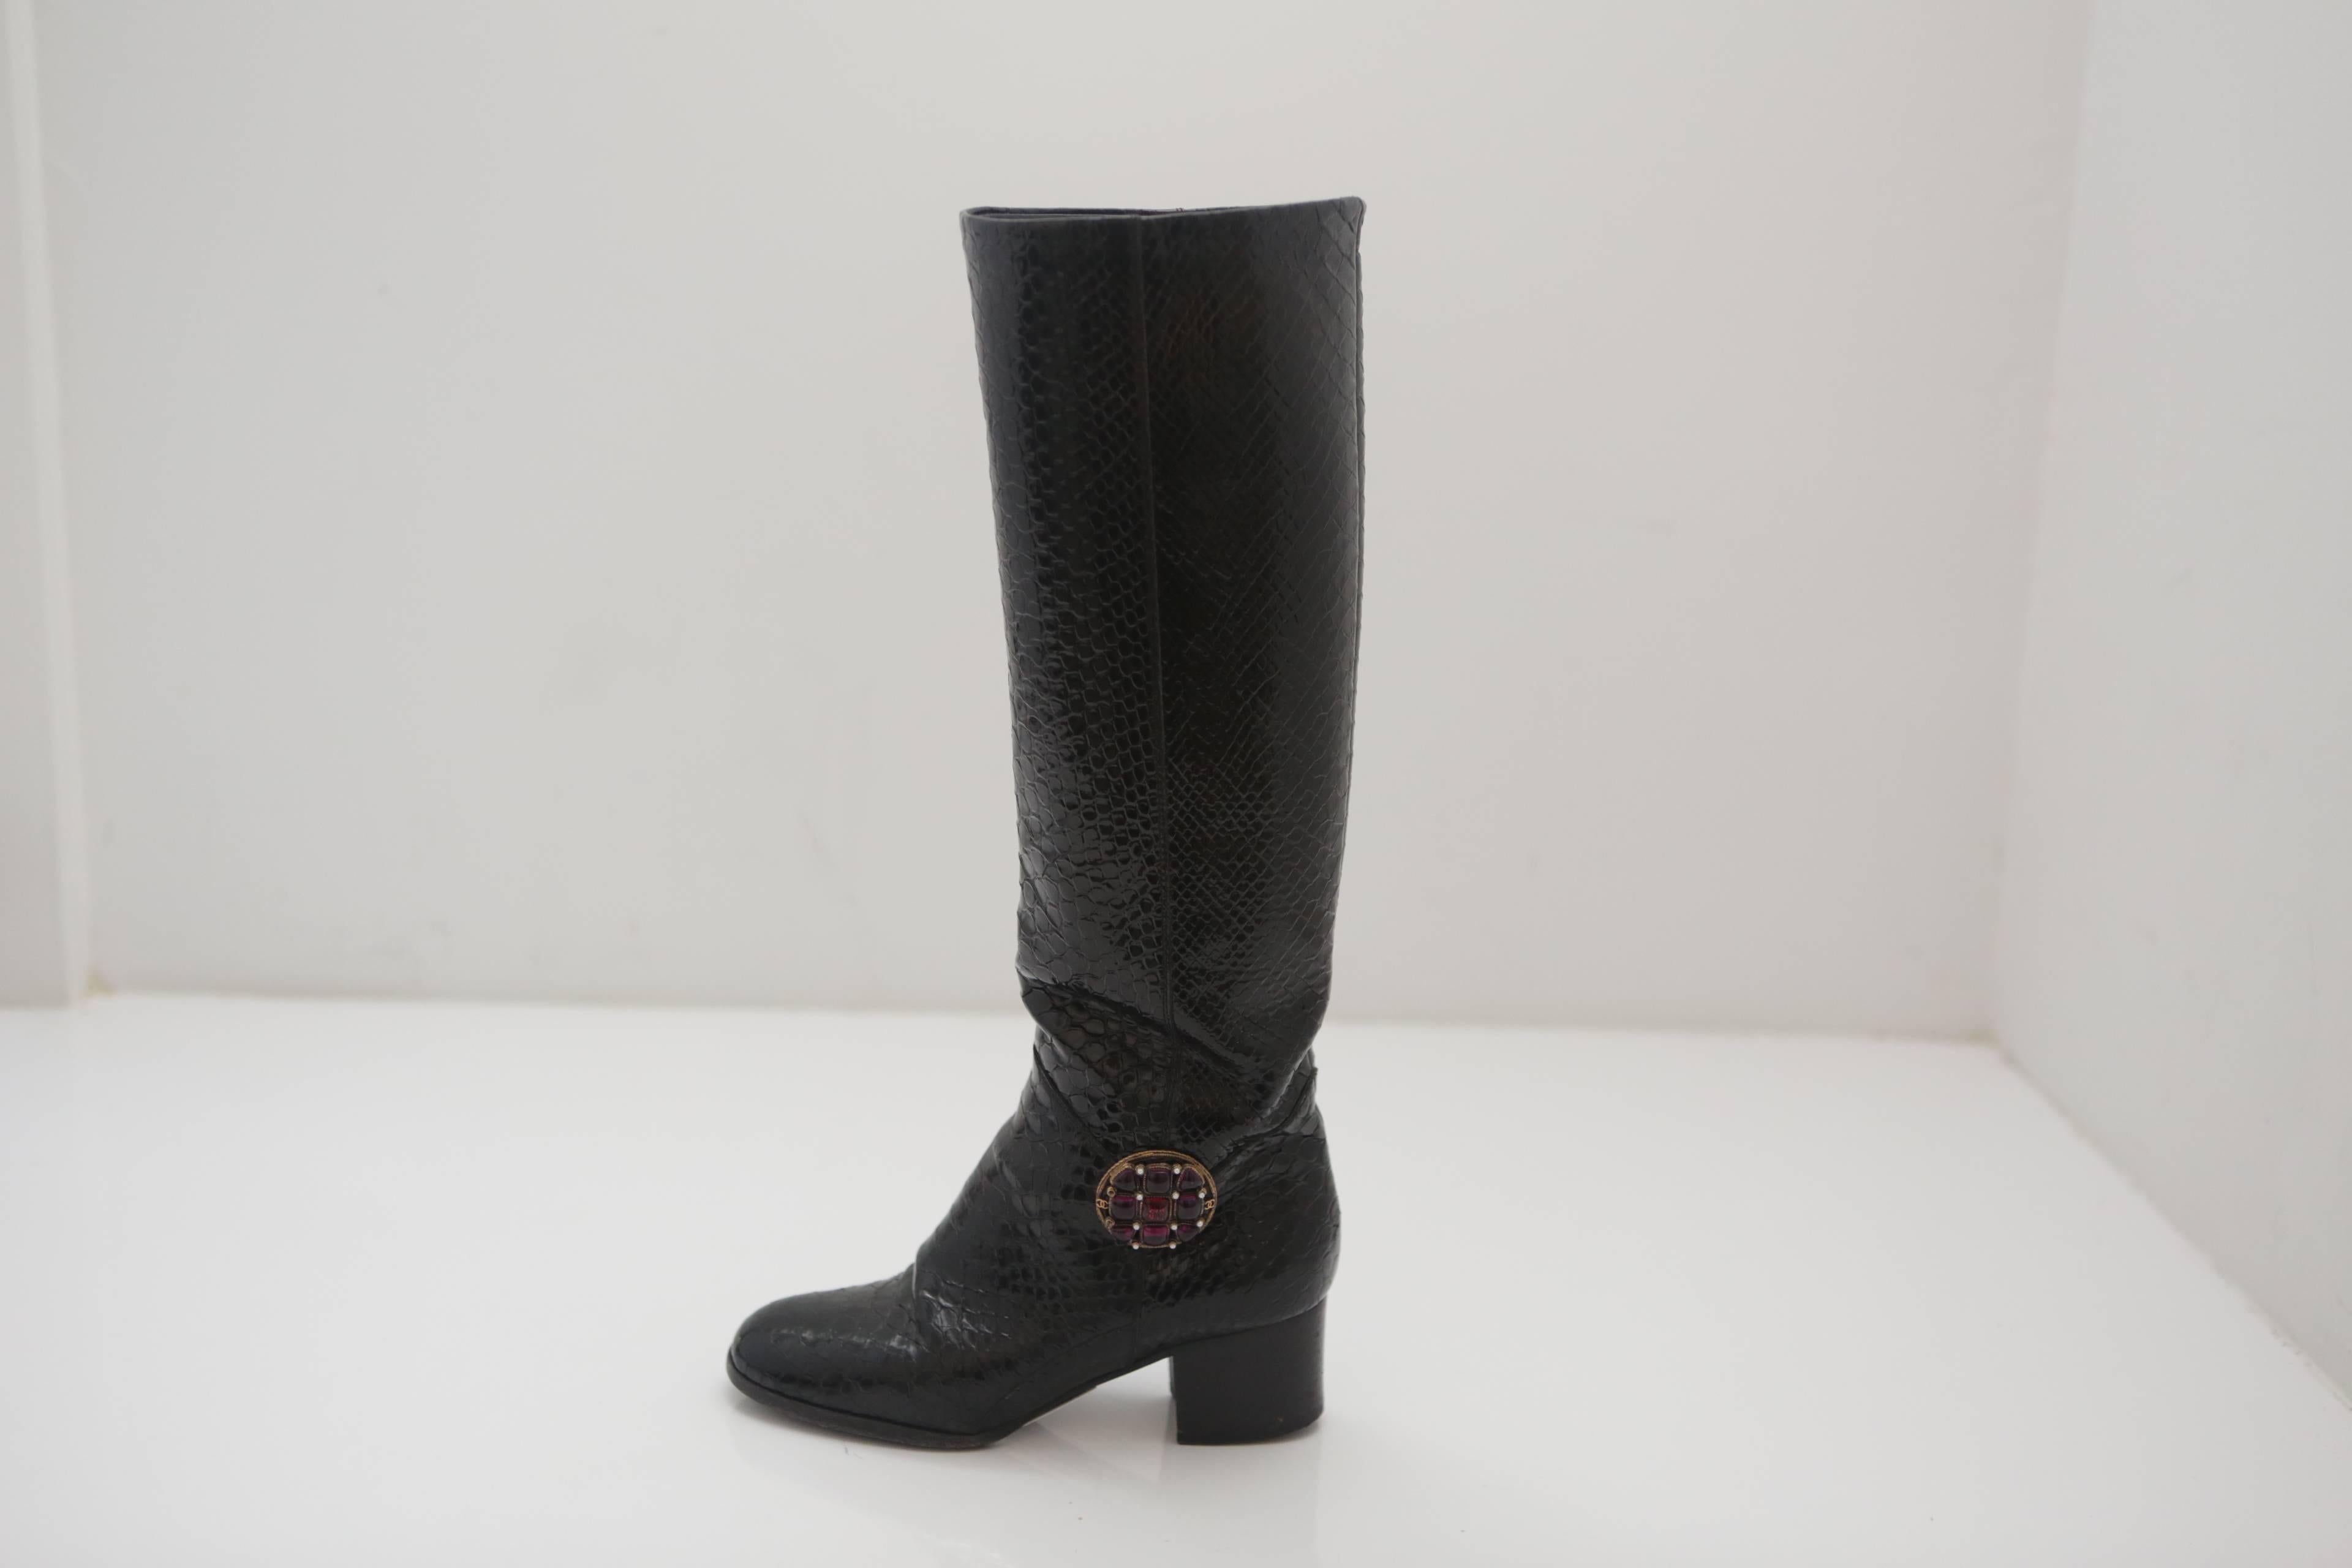 Chanel pair of black snakeskin boots with 15" zipper less shaft, 2" heel and ruby colored stone & pearl adornment. 